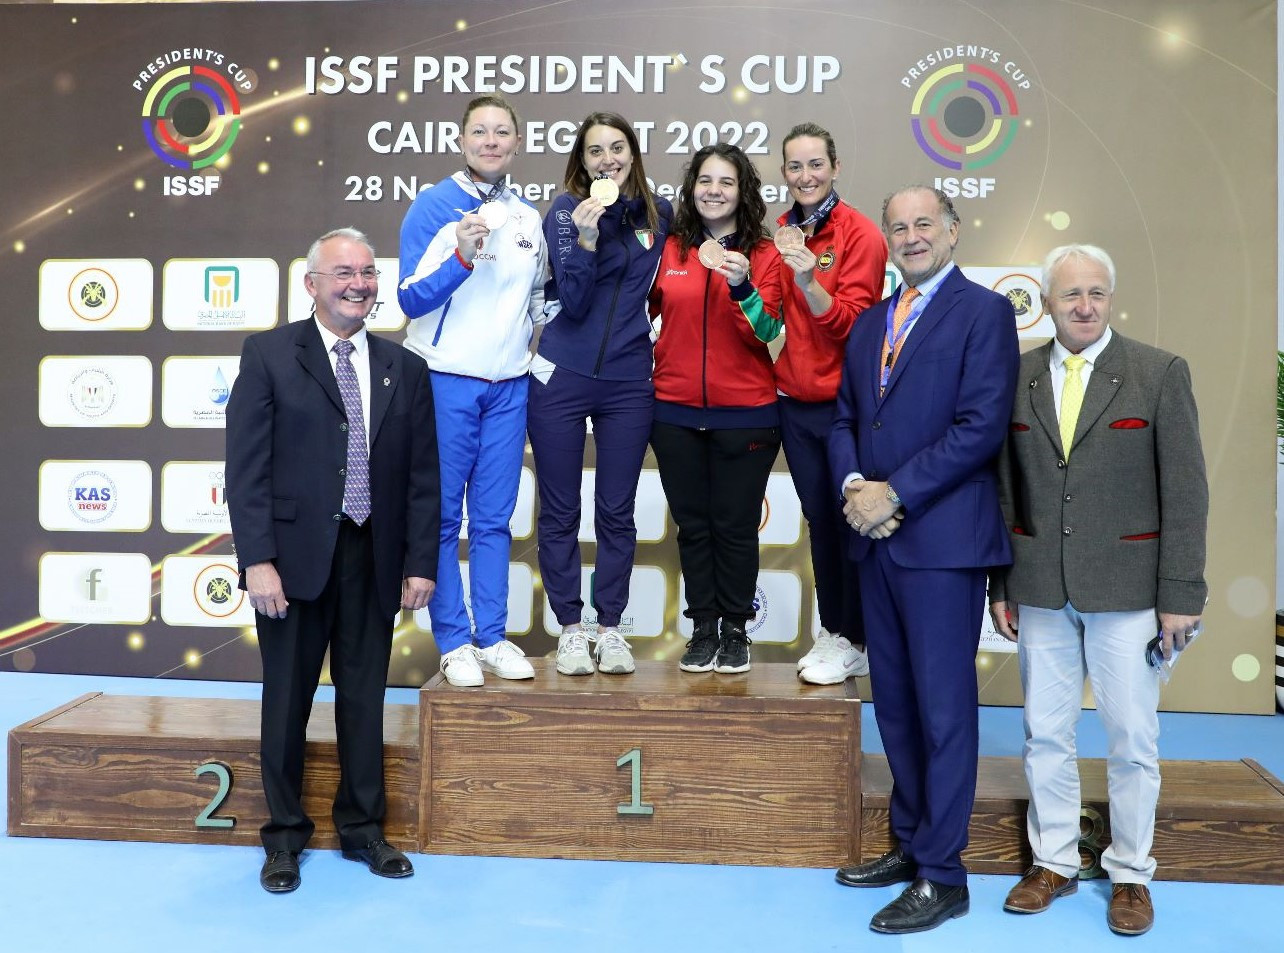 Exclusive: Lisin reneged on promise to provide €792,000 prize money for ISSF President's Cup after losing election